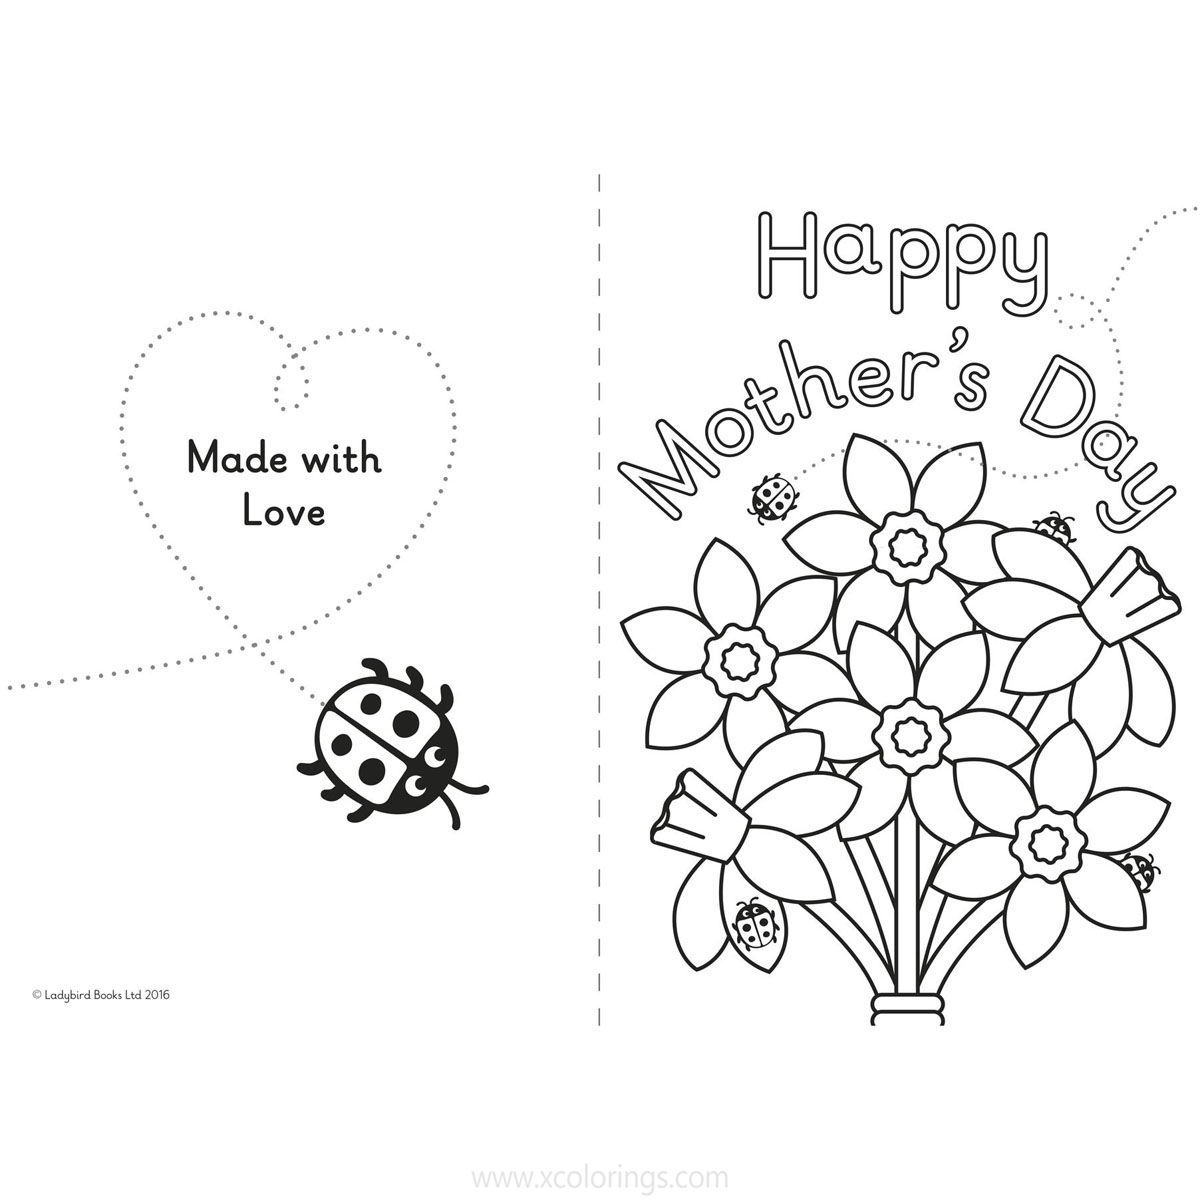 Free Mother's Day Card Coloring Pages printable